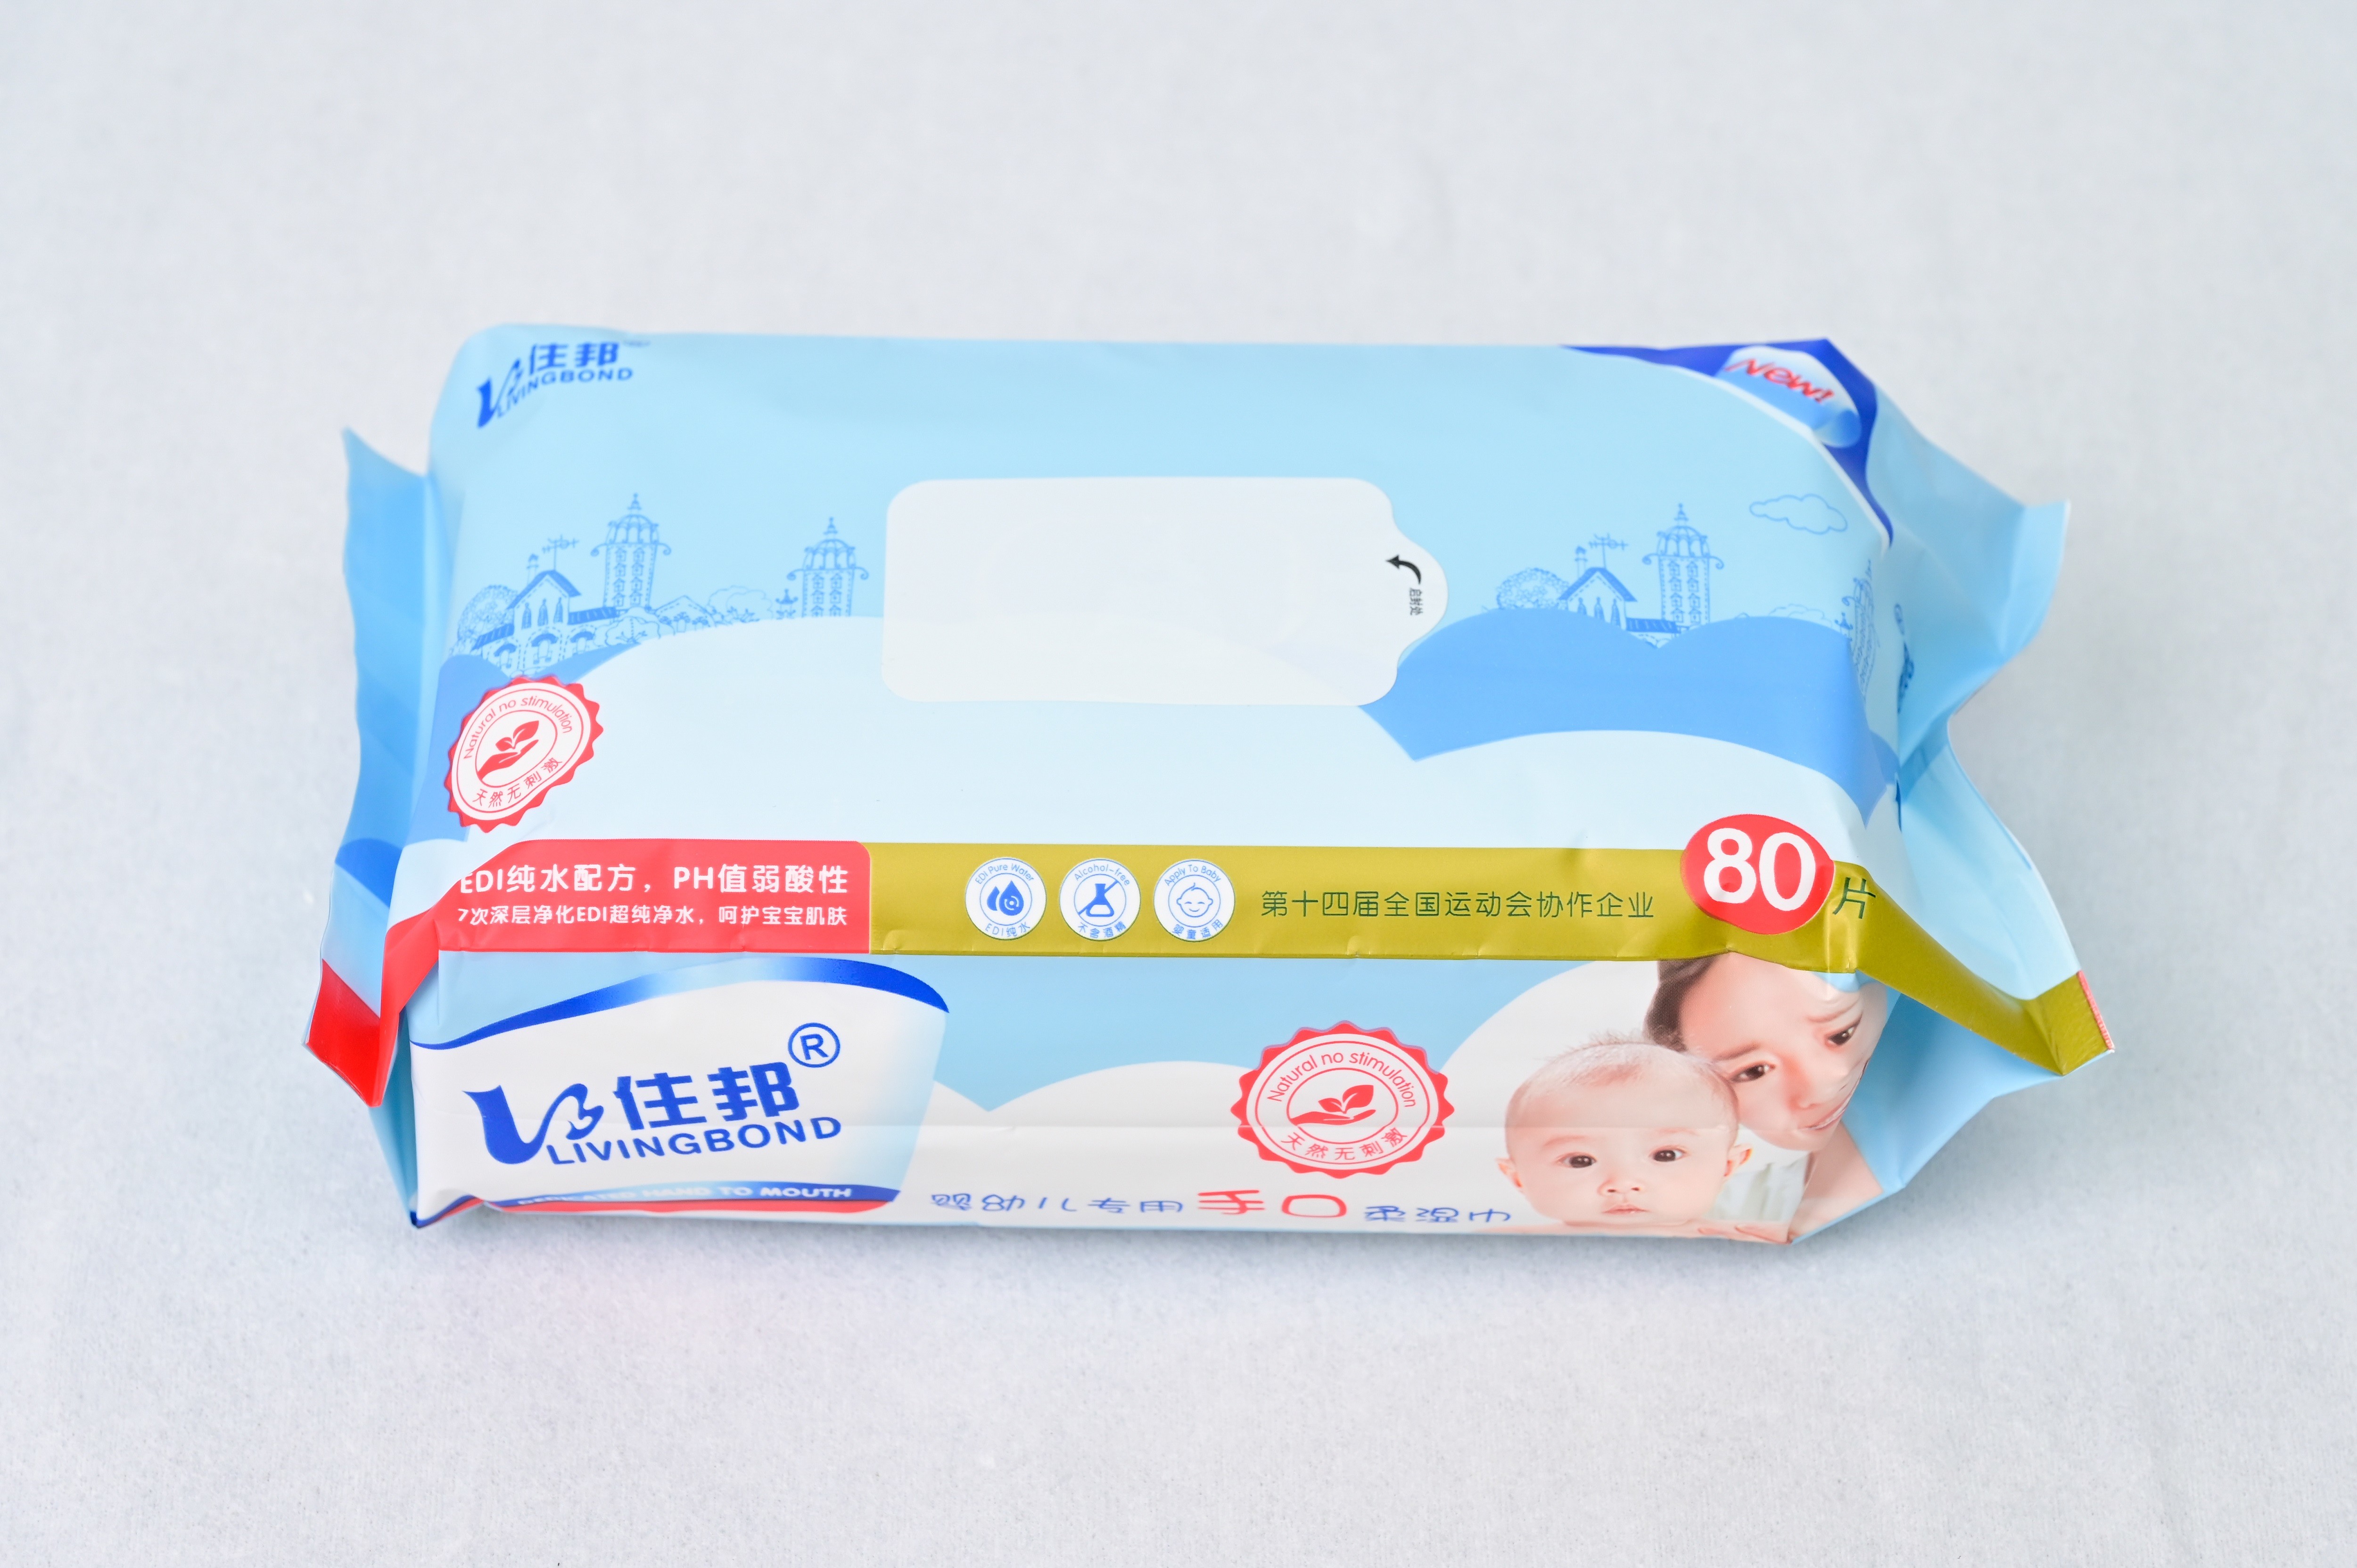 China GMP Certified Baby Wet Wipes Alcohol Free Paraben Free Allergy Tested Wipes factory